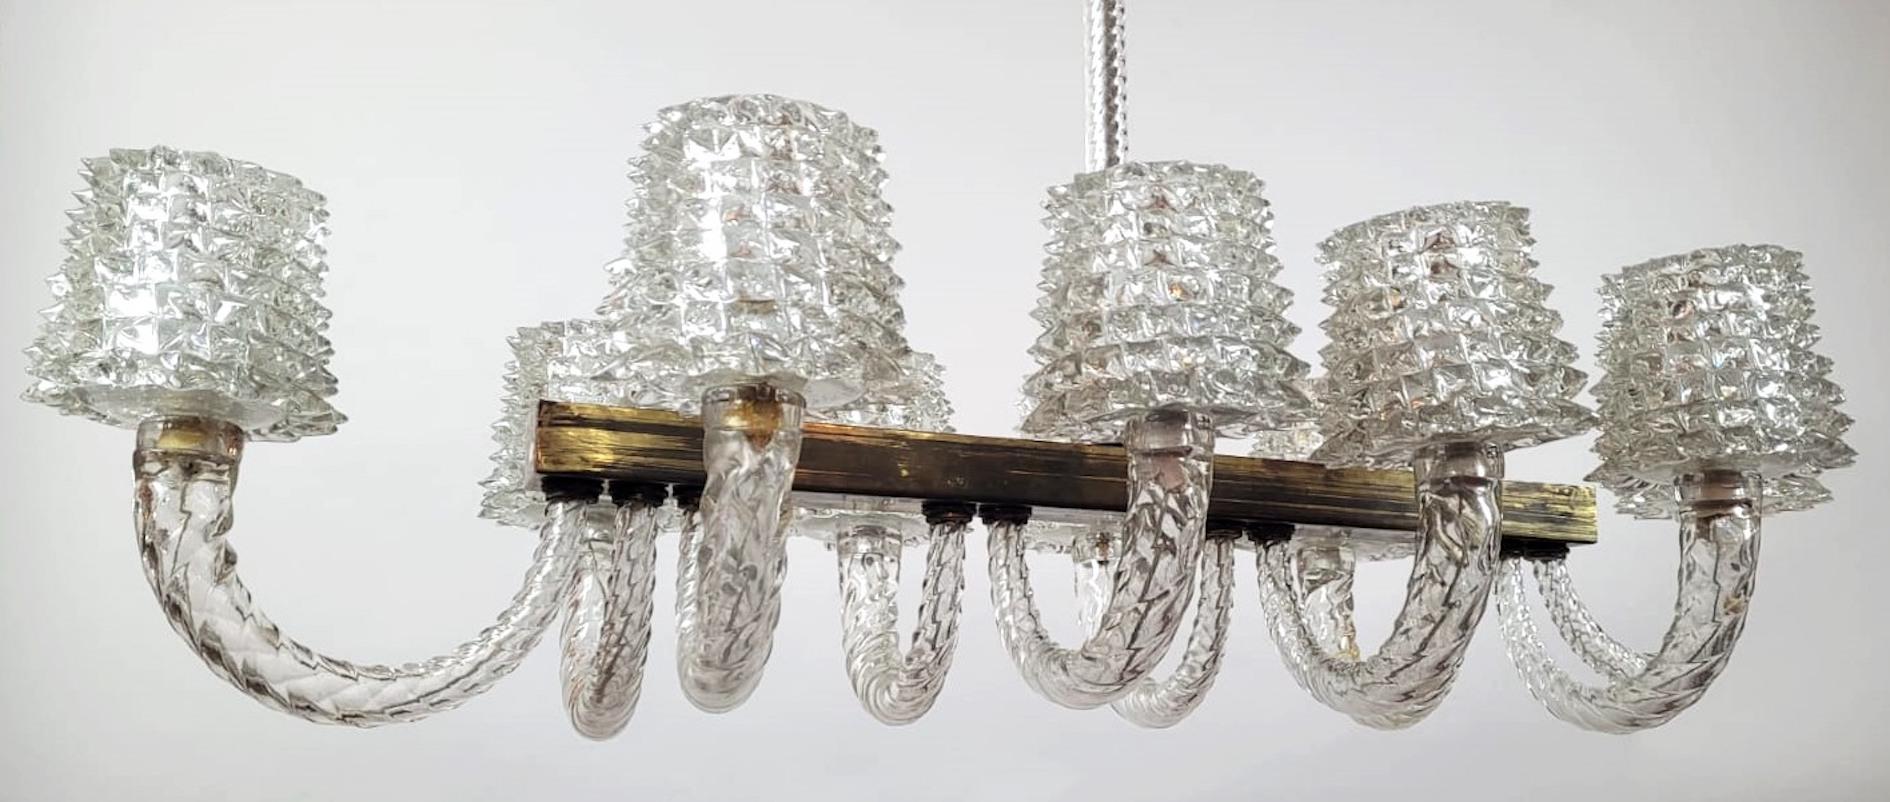 Late 20th Century Large Barovier And Toso Chandelier - Murano - 10 Sconces For Sale